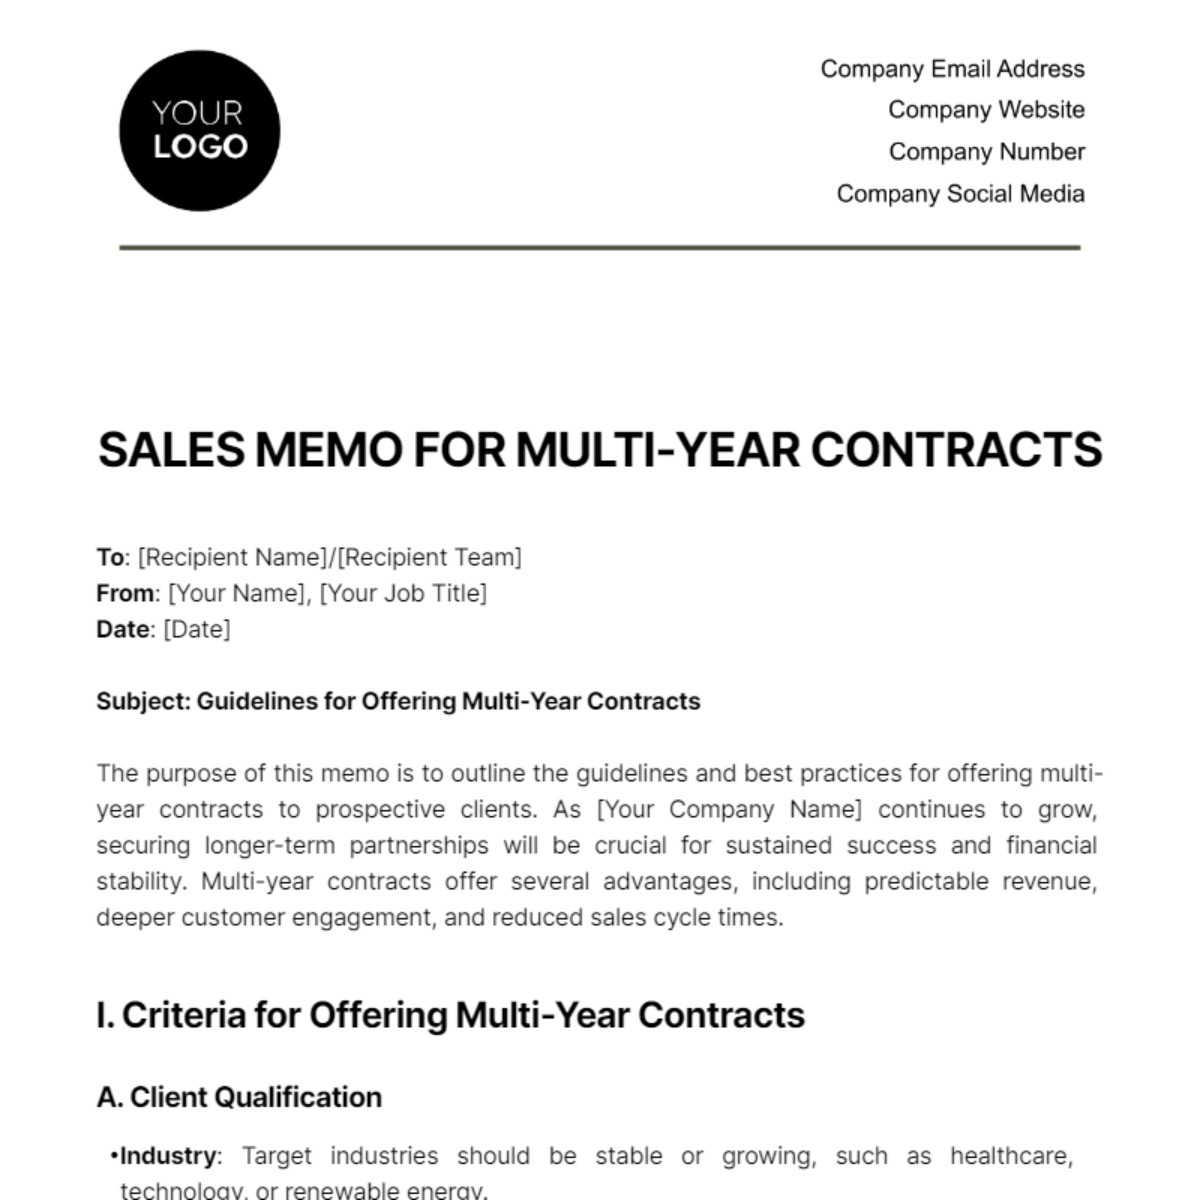 Free Sales Memo for Multi-Year Contracts Template